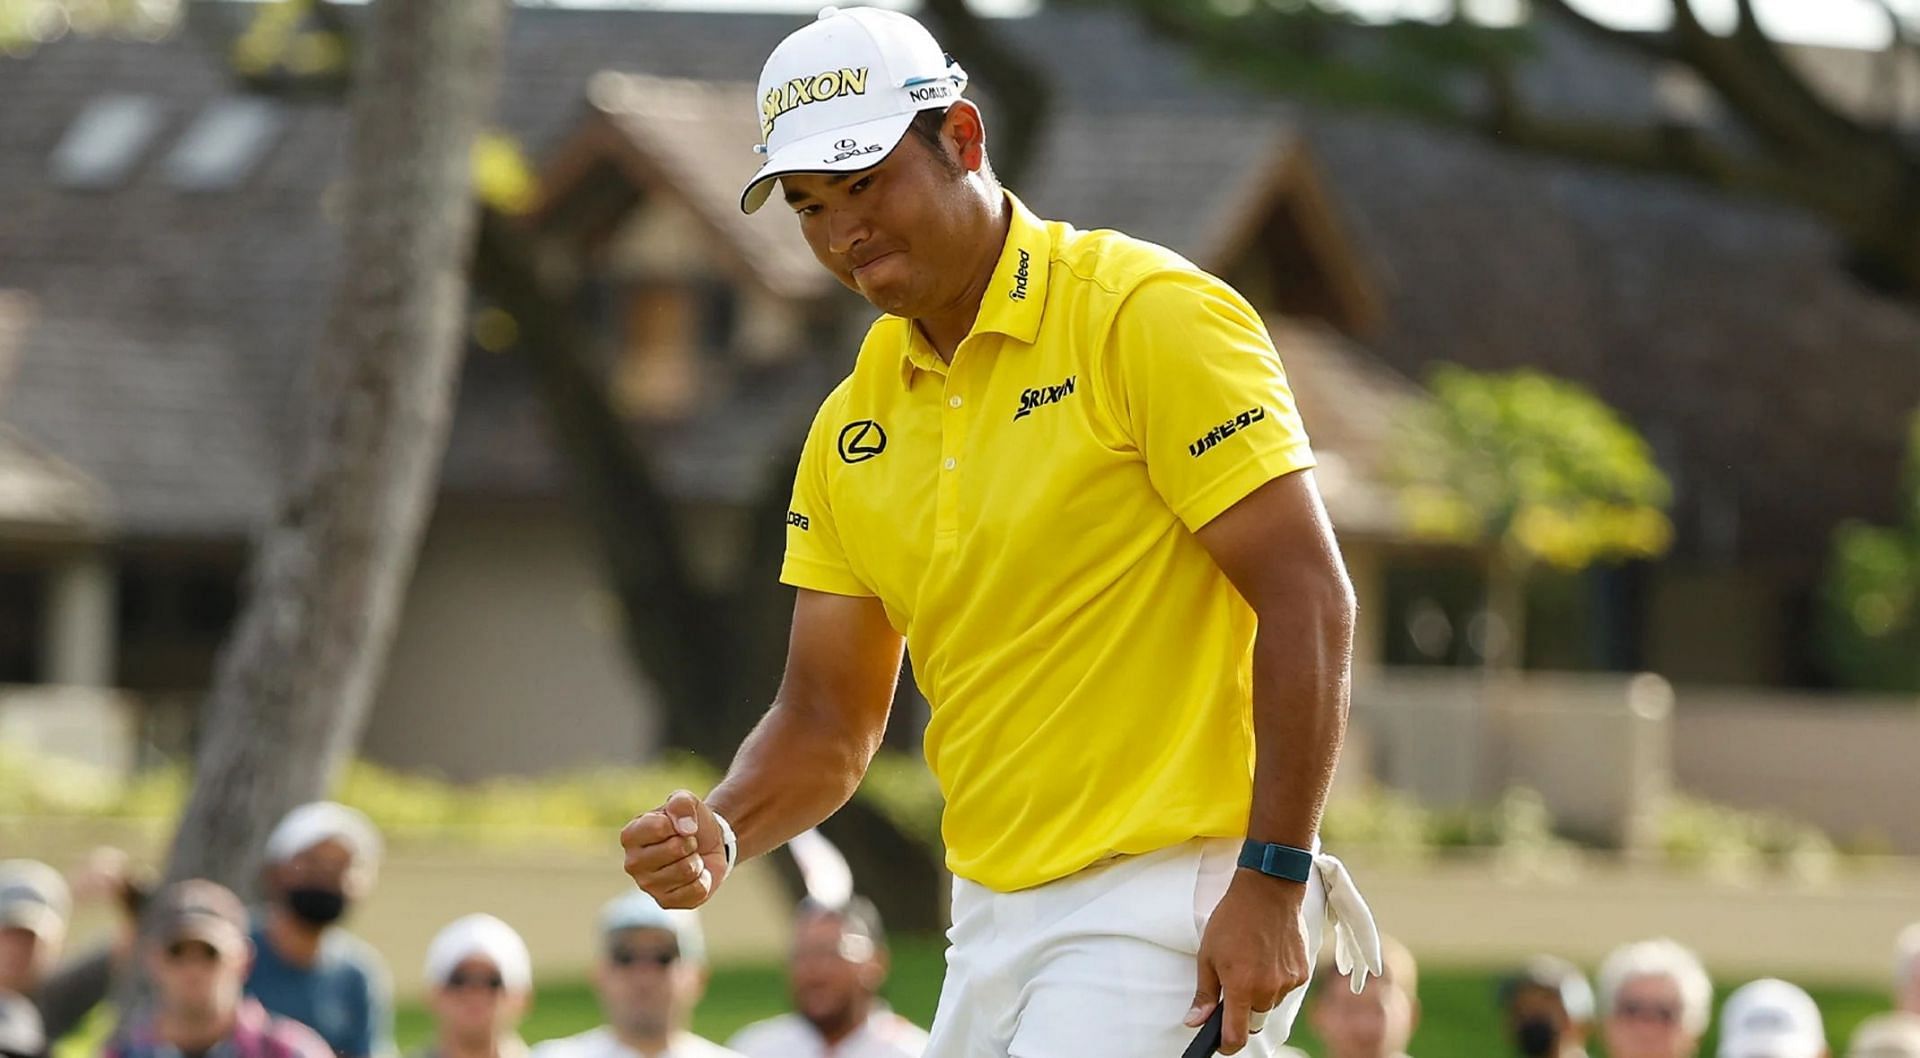 Matsuyama won the Sony Open 2022 by hitting an Eagle in the playoff